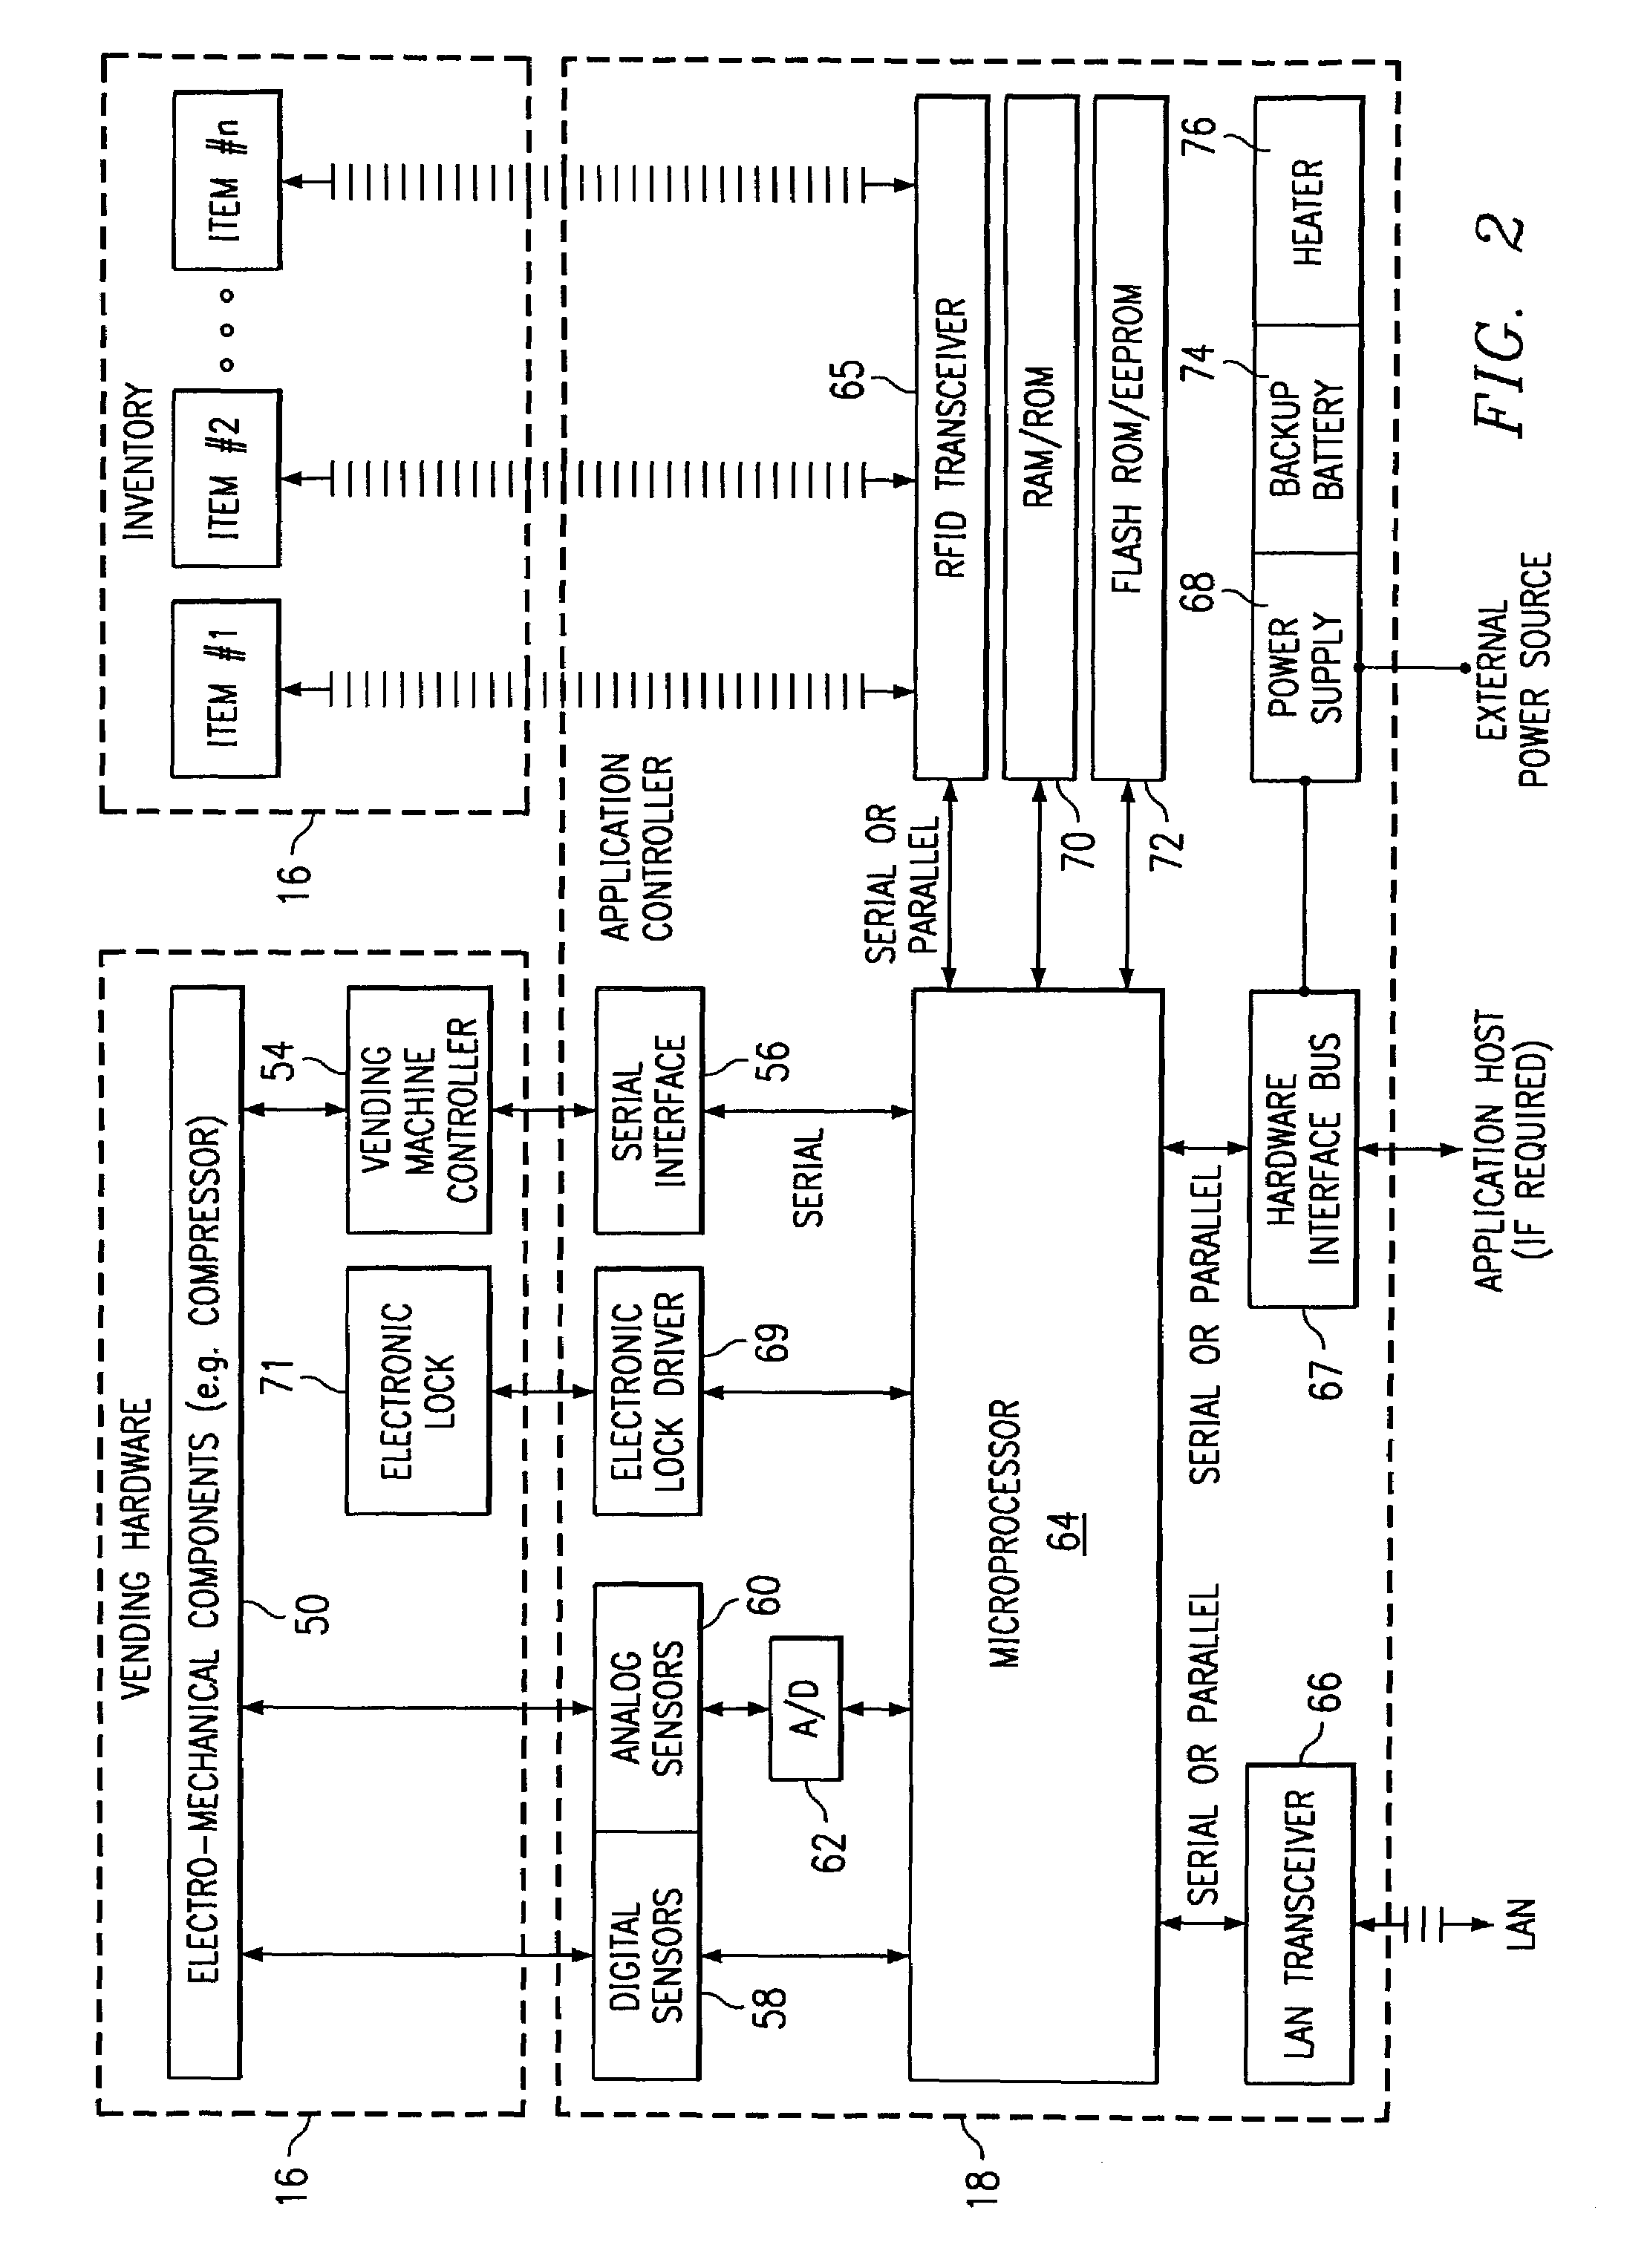 Remote data acquisition and transmission system and method